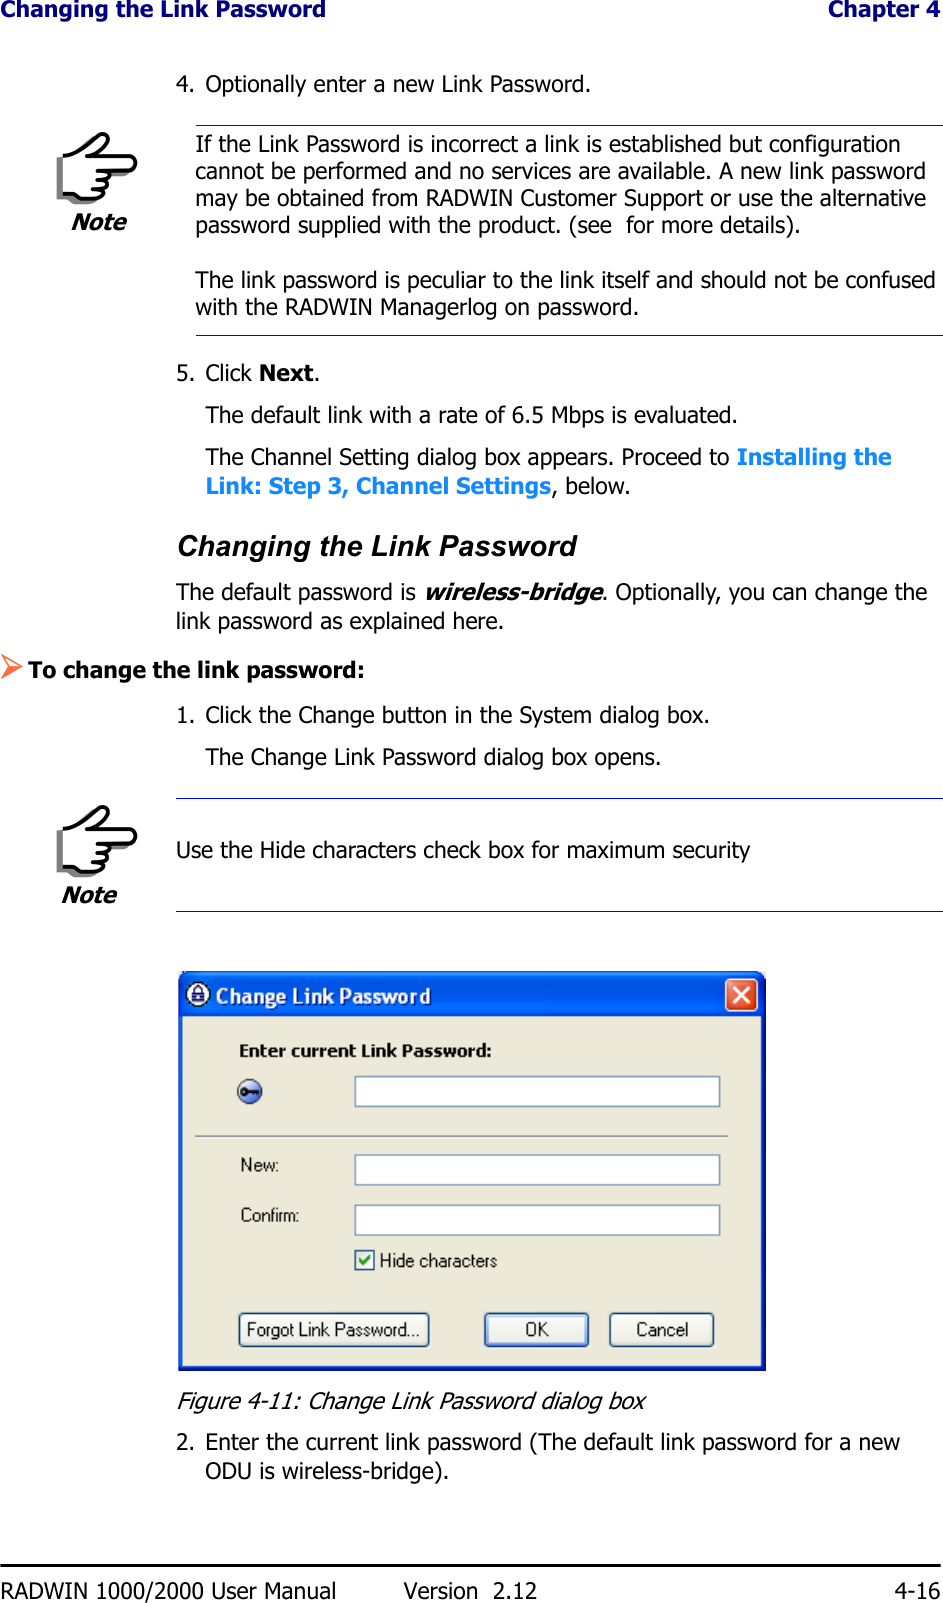 Changing the Link Password  Chapter 4RADWIN 1000/2000 User Manual Version  2.12 4-164. Optionally enter a new Link Password. 5. Click Next.The default link with a rate of 6.5 Mbps is evaluated.The Channel Setting dialog box appears. Proceed to Installing the Link: Step 3, Channel Settings, below.Changing the Link PasswordThe default password is wireless-bridge. Optionally, you can change the link password as explained here.¾To change the link password:1. Click the Change button in the System dialog box.The Change Link Password dialog box opens.Figure 4-11: Change Link Password dialog box2. Enter the current link password (The default link password for a new ODU is wireless-bridge).NoteIf the Link Password is incorrect a link is established but configuration cannot be performed and no services are available. A new link password may be obtained from RADWIN Customer Support or use the alternative password supplied with the product. (see  for more details).The link password is peculiar to the link itself and should not be confused with the RADWIN Managerlog on password.NoteUse the Hide characters check box for maximum security